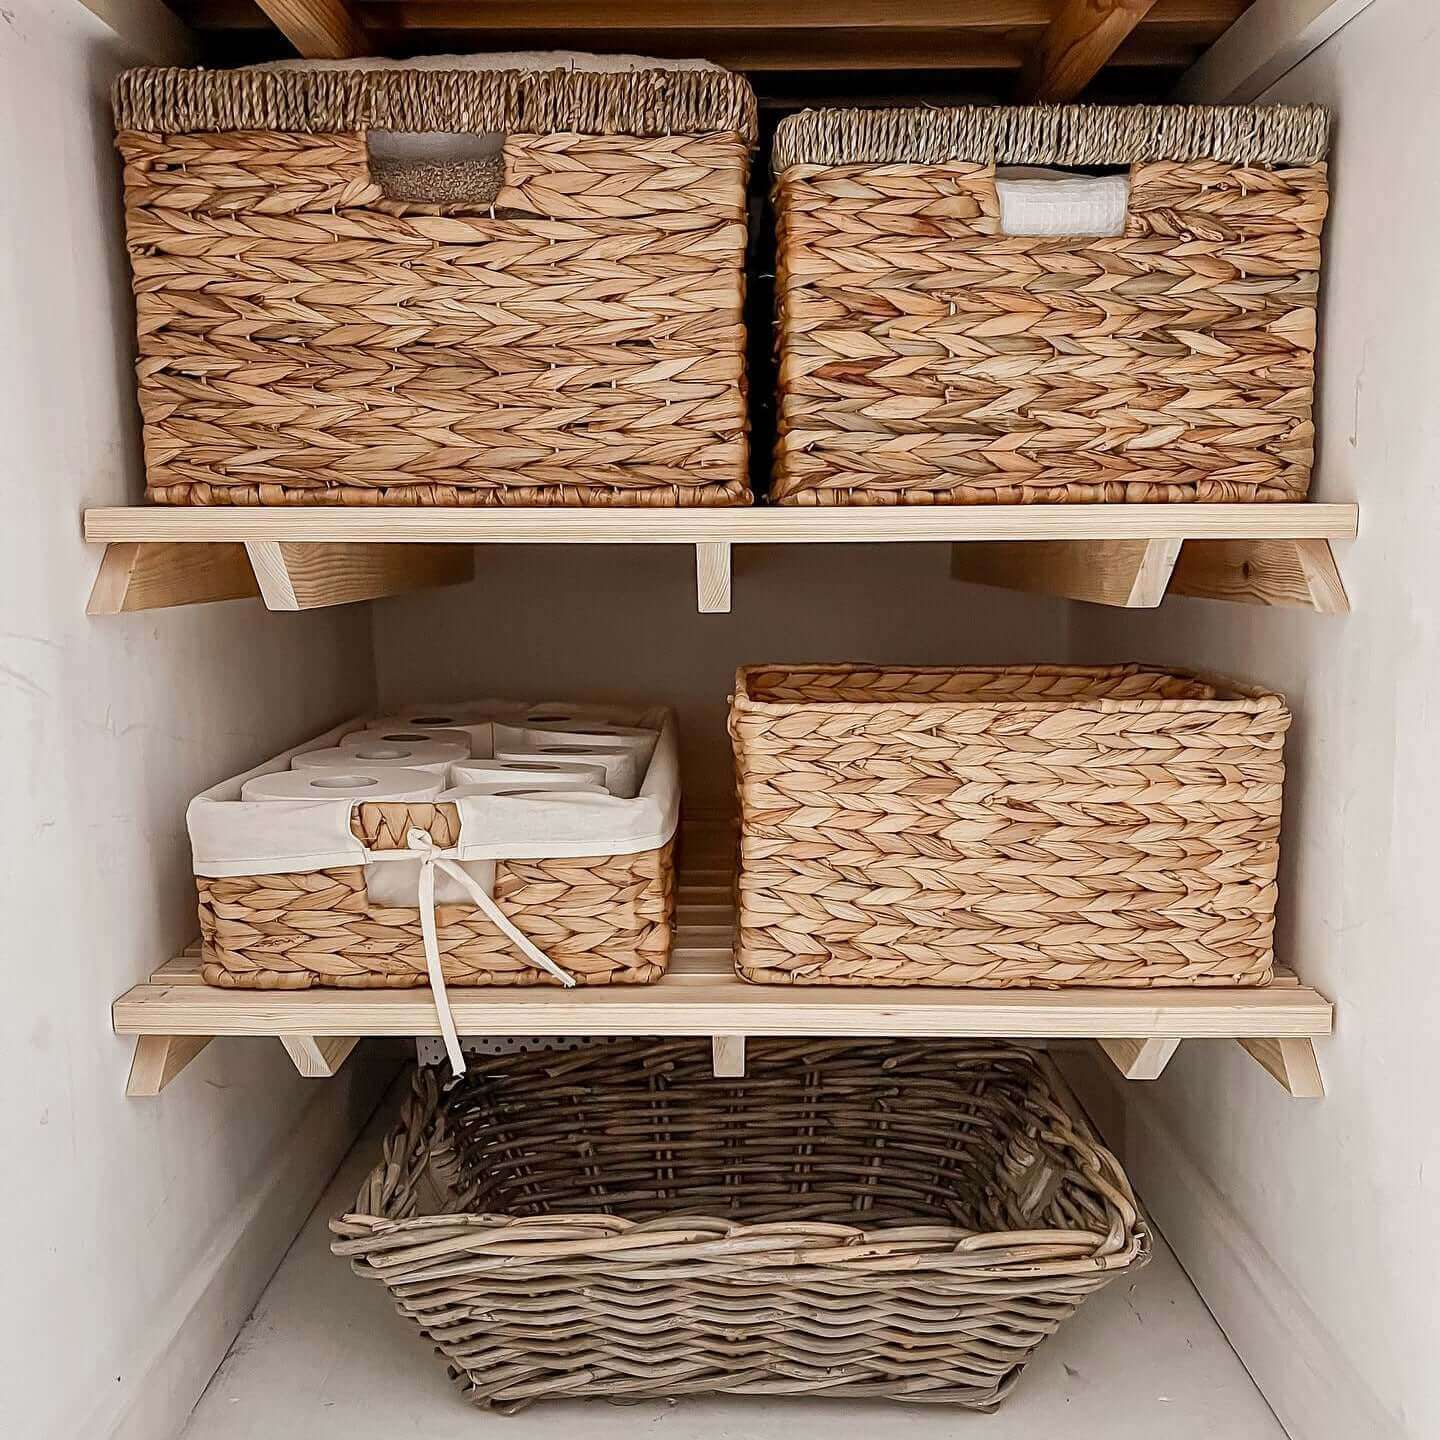 Airing Cupboard Wooden Slatted Shelves - 30 cm by 28 cm